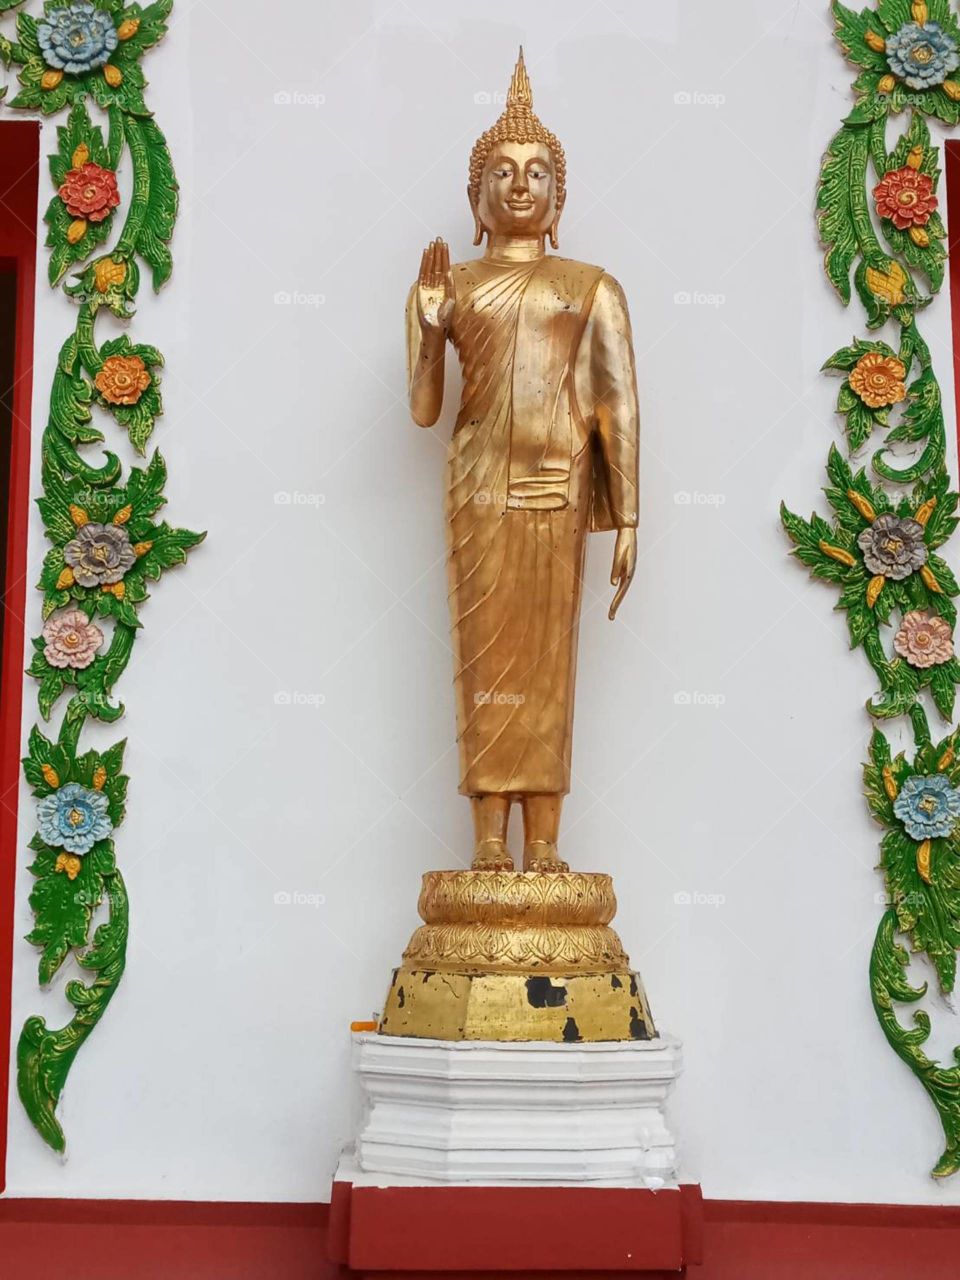 Vertical standing Buddha is here for you for his kindness to give and bless. วัดท่ามะขาม วัดอาแปะโรงสี